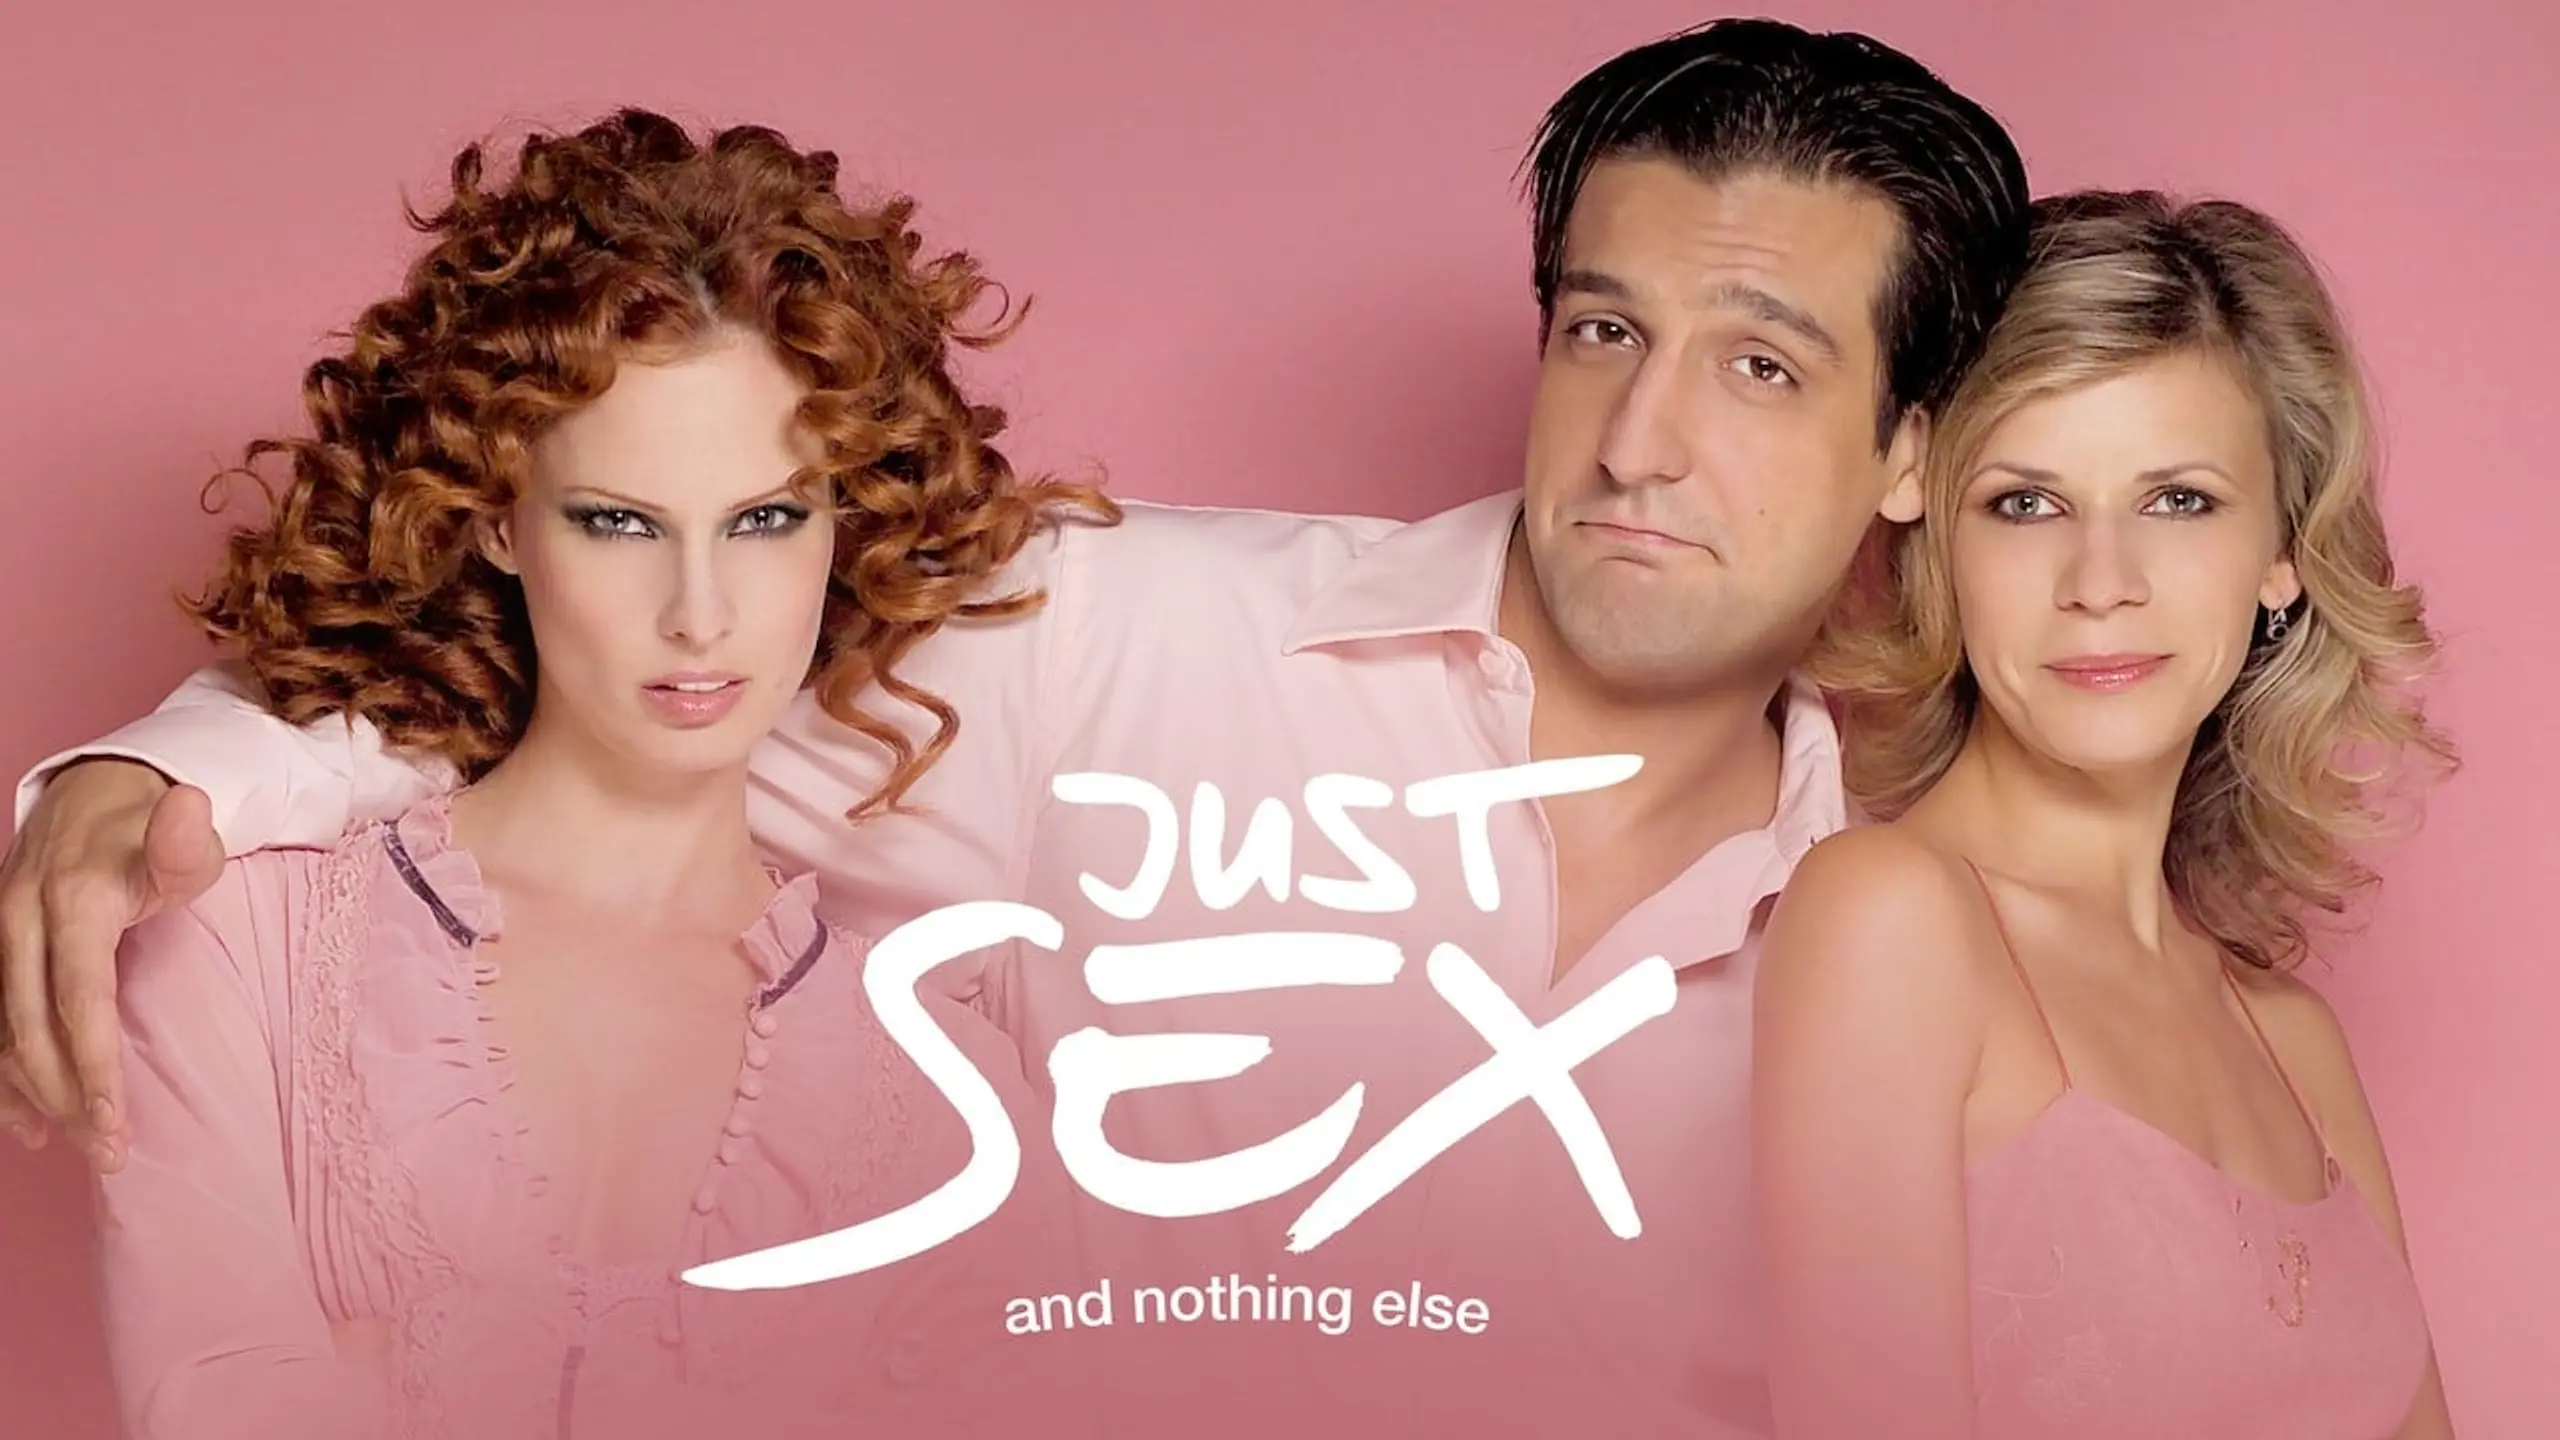 Just Sex and Nothing else